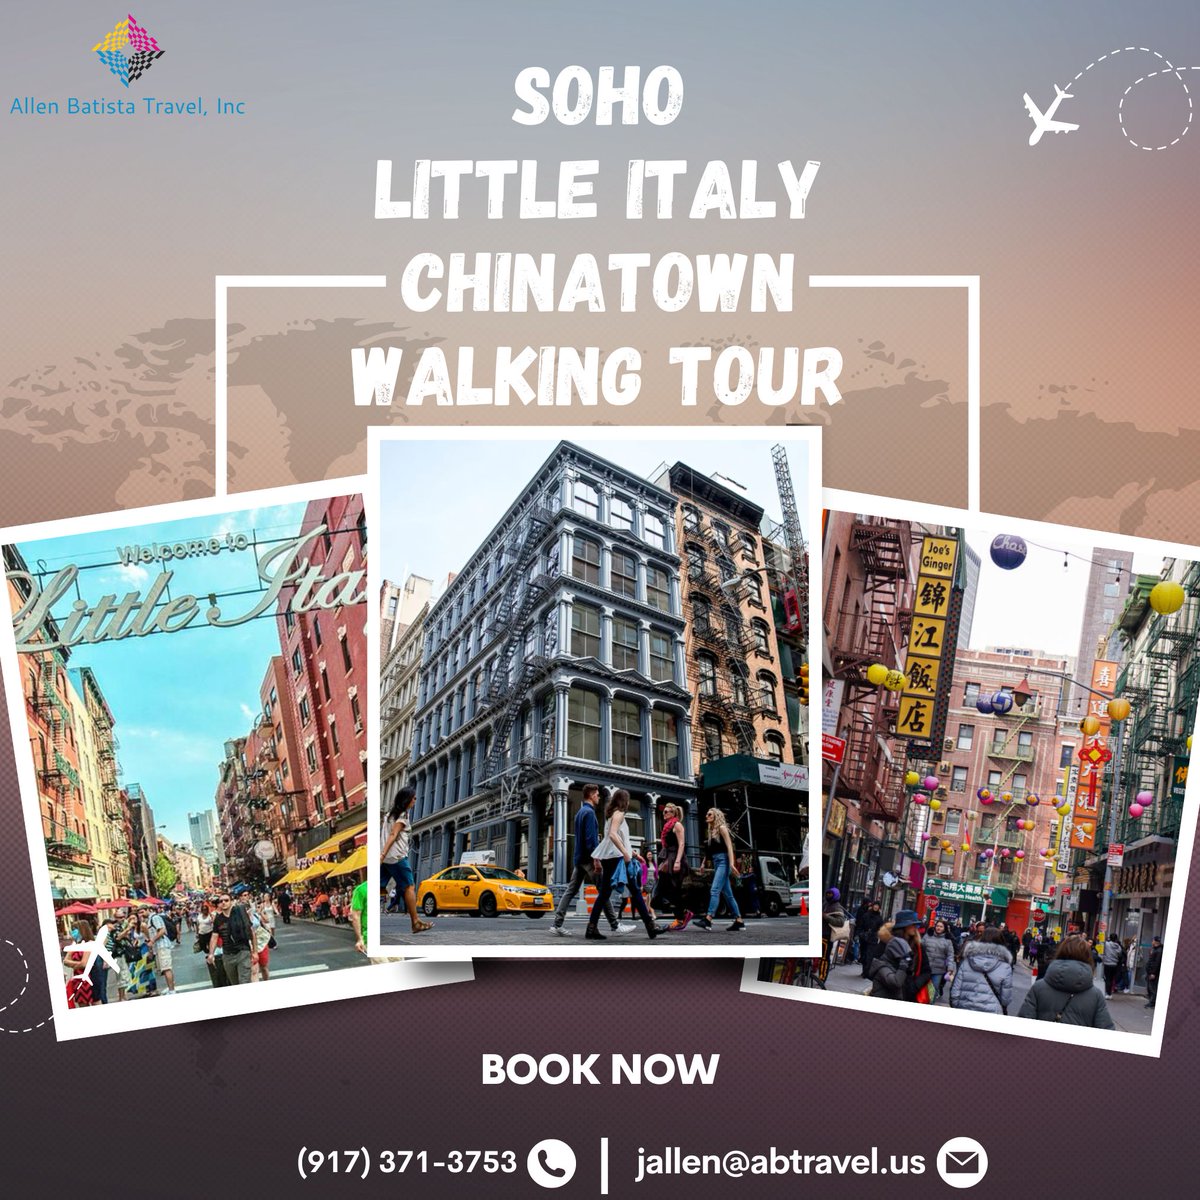 Join our SoHo Little Italy Chinatown Walking Tour. Wander through three iconic neighborhoods and uncover culture, history and fun facts about the neighborhoods. Book now!
abtravel.us/soho-little-it…
#NYCTour #SoHoWalkingTour #LittleItaly #Chinatown